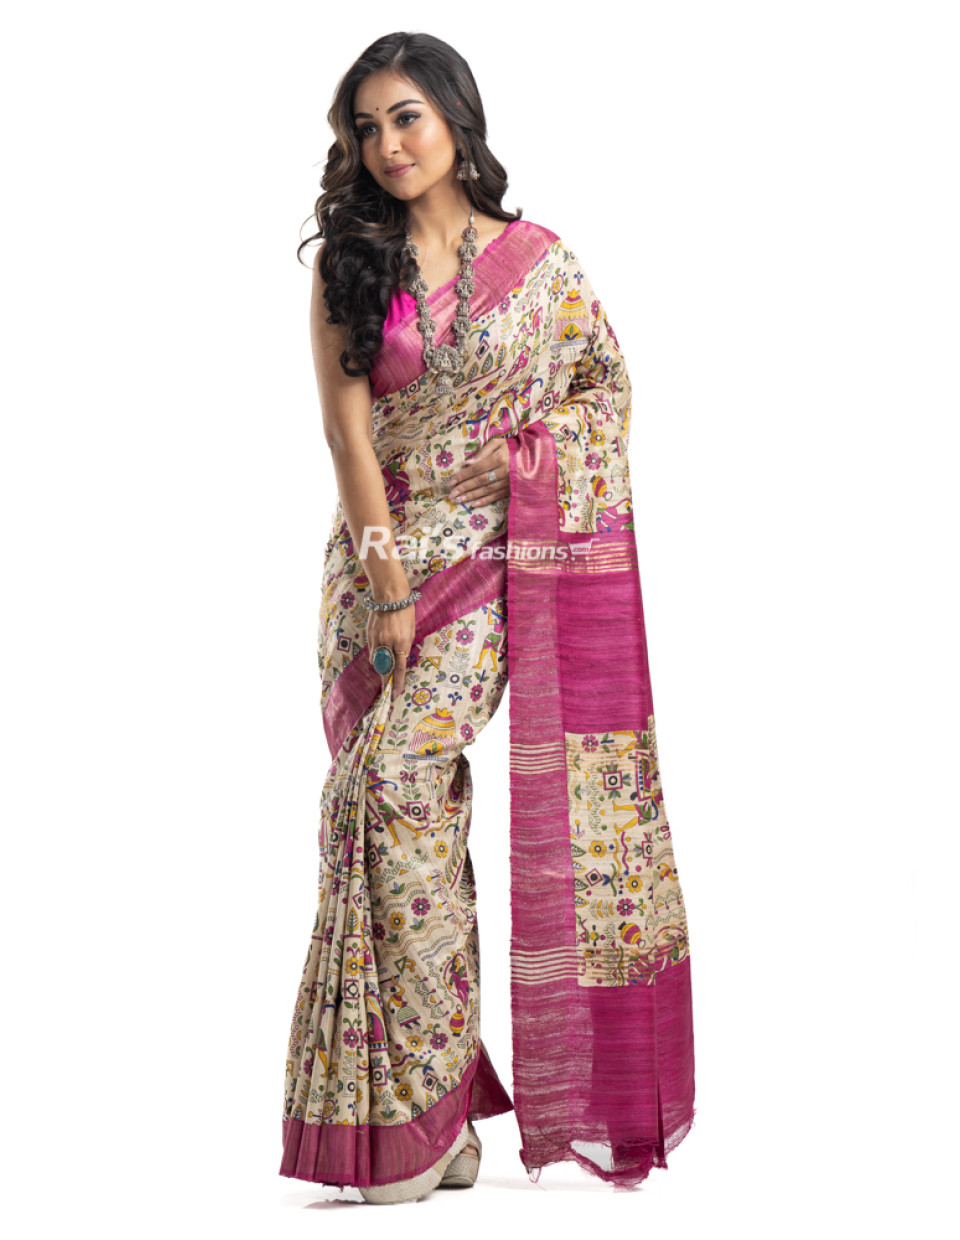 Off White Gicha Silk Saree With Digital Print On All Over Base And Contrast Color Border And Pallu (KR2208)